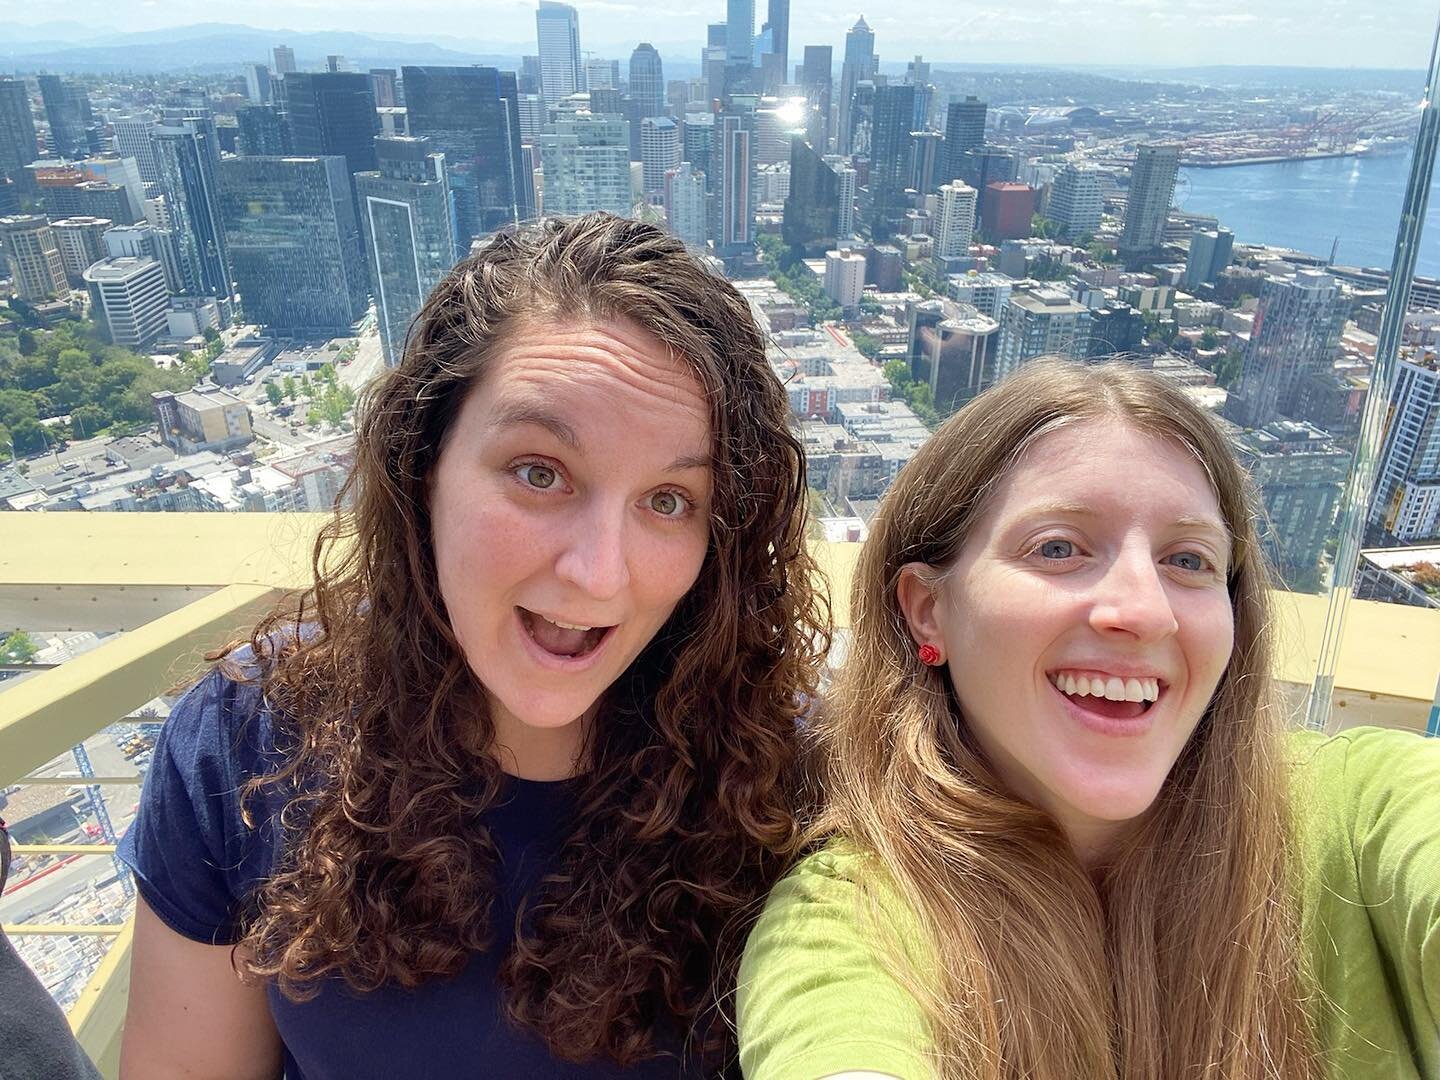 Feelin on top of the world (and a lil sleepy) after our west coast run ☀️ We&rsquo;ve got some nifty east coast shows ahead - catch you next in Bristol, CT at @acousticool 7/25!